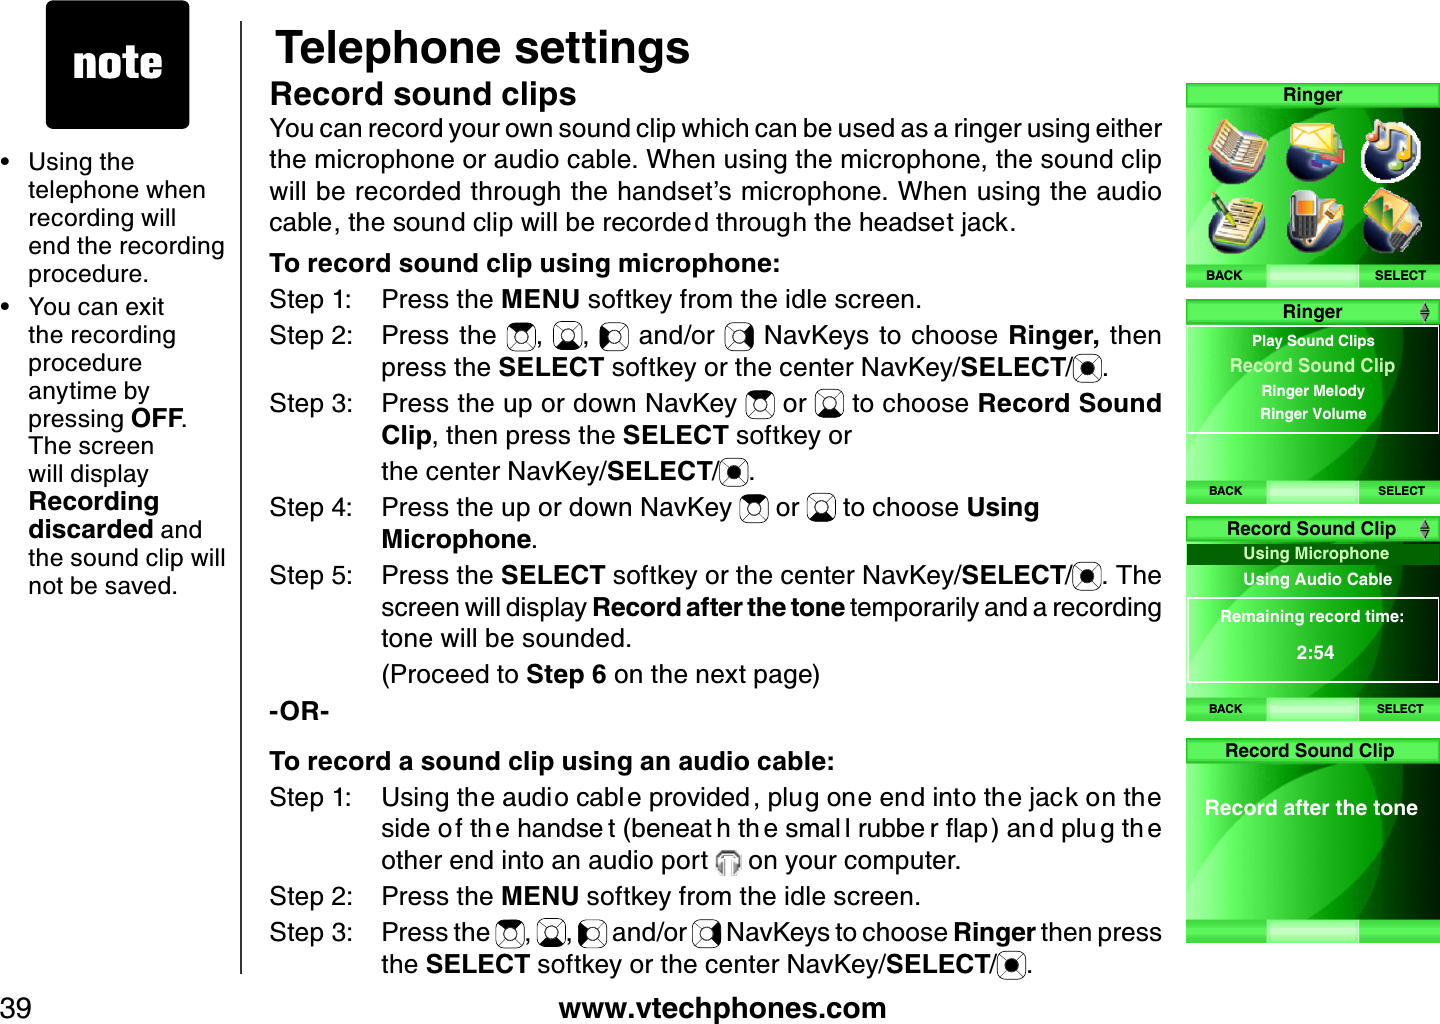 www.vtechphones.com39Telephone settingsRecord sound clipsYou can record your own sound clip which can be used as a ringer using either the microphone or audio cable. When using the microphone, the sound clip will be recorded through the handset’s microphone. When using the audio ECDNGVJGUQWPFENKRYKNNDGTGEQTFGFVJTQWIJVJGJGCFUGVLCEMTo record sound clip using microphone:Step 1: Press the MENU softkey from the idle screen.Step 2: Press the  , ,  and/or   NavKeys to choose Ringer, then press the SELECT softkey or the center NavKey/SELECT/.Step 3: Press the up or down NavKey   or   to choose Record Sound Clip, then press the SELECT softkey or     the center NavKey/SELECT/.Step 4: Press the up or down NavKey   or   to choose Using Microphone.Step 5: Press the SELECT softkey or the center NavKey/SELECT/. The screen will display Record after the tone temporarily and a recording tone will be sounded.     (Proceed to Step 6 on the next page)-OR-To record a sound clip using an audio cable:5VGR 7UKPIVJGCWFKQECDN GRTQXKFGF RNWIQPGGPFKPVQVJGLCEMQPVJGUKFGQ HVJ GJCPFUG VDGPGCV JVJ GUOCN NTWDDG TƀCRCP FRNW IVJ Gother end into an audio port   on your computer.Step 2: Press the MENU softkey from the idle screen.Step 3: Press the  ,  ,   and/or   NavKeys to choose Ringer then press the SELECT softkey or the center NavKey/SELECT/.Using the telephone when recording will end the recording procedure.You can exit the recording procedure anytime by pressing OFF.The screen will display Recording discarded and the sound clip will not be saved.••SELECTRingerBACKBACK SELECTRingerPlay Sound ClipsRinger Melody Ringer Volume Record Sound ClipBACKUsing Microphone Using Audio Cab le Remaining record time:2:54Record Sound ClipSELECTRecord after the toneRecord Sound Clip